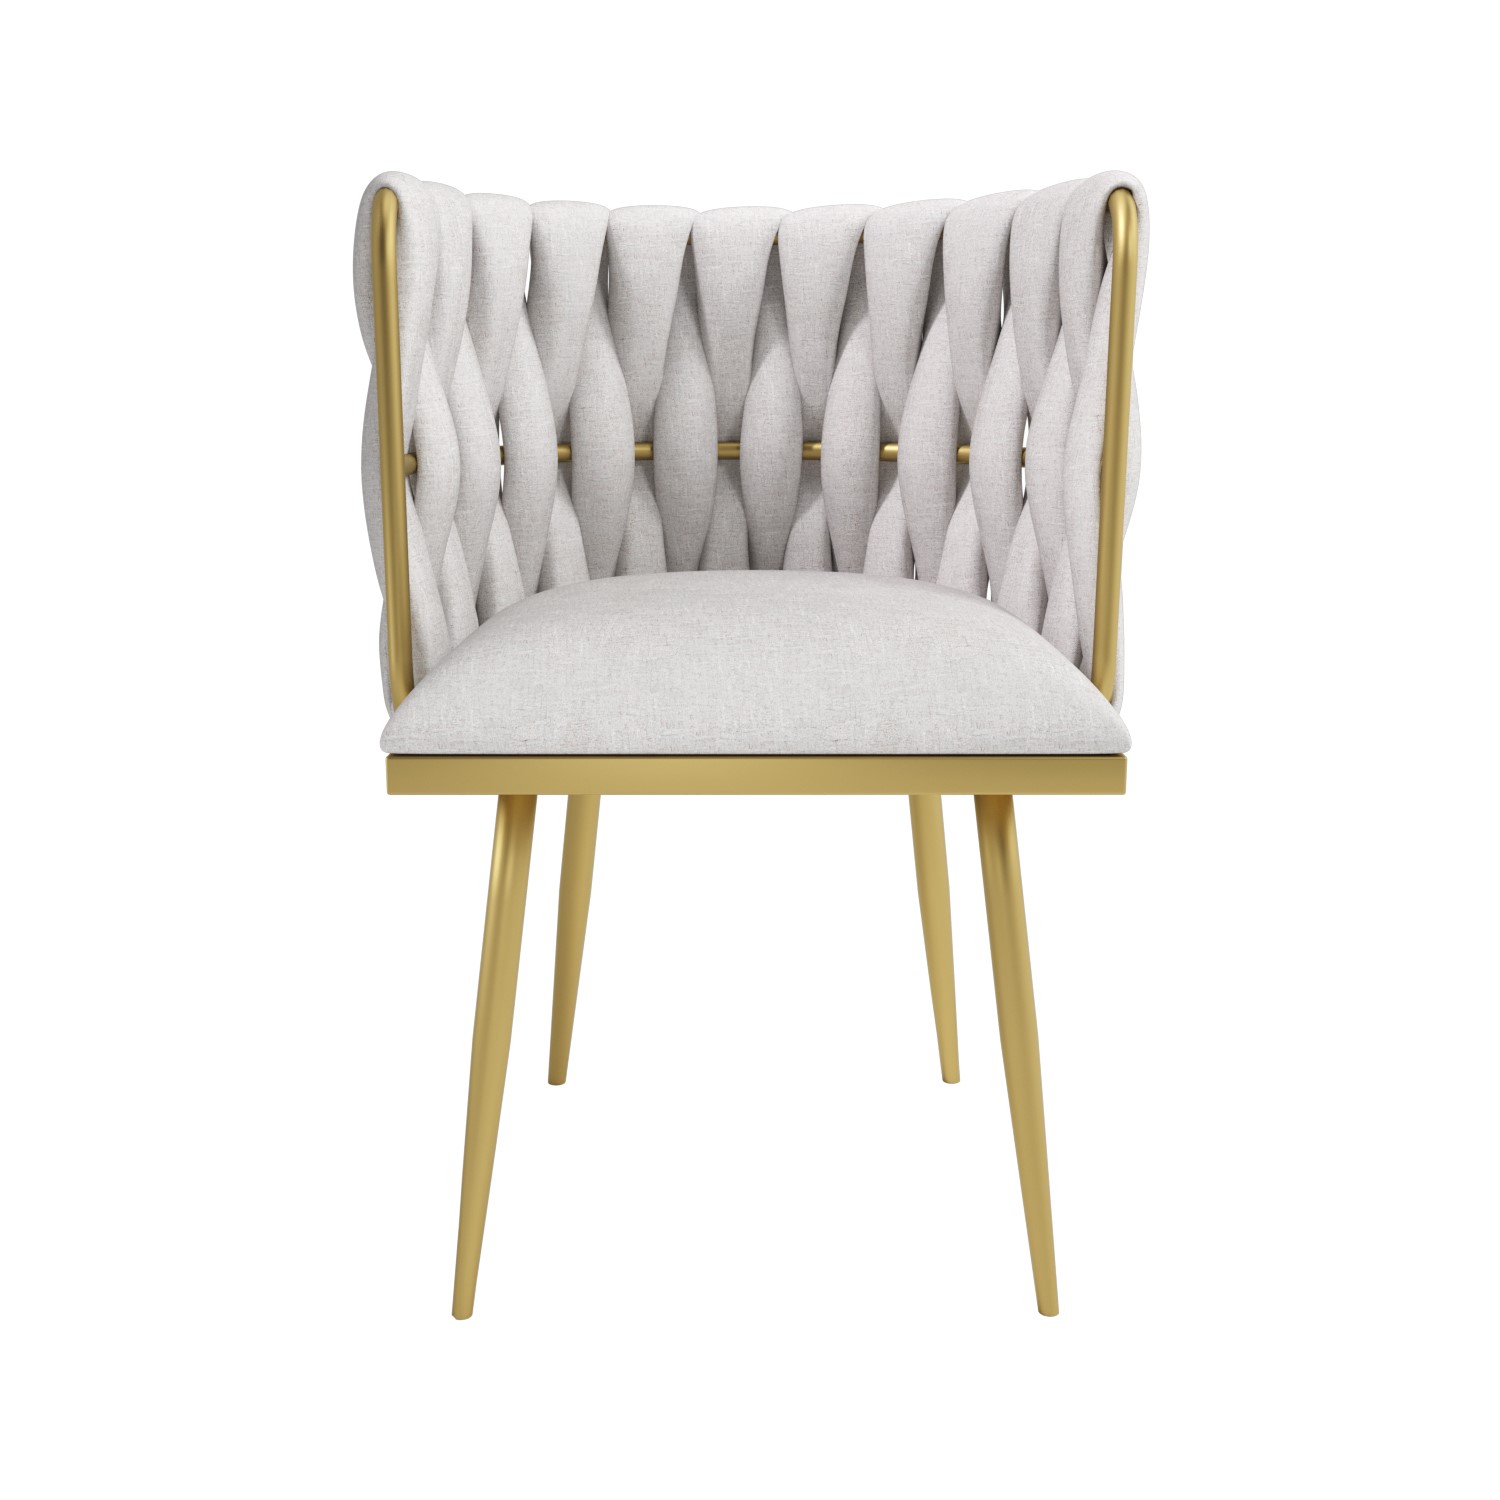 Read more about Cream woven linen dressing table chair with gold legs malika